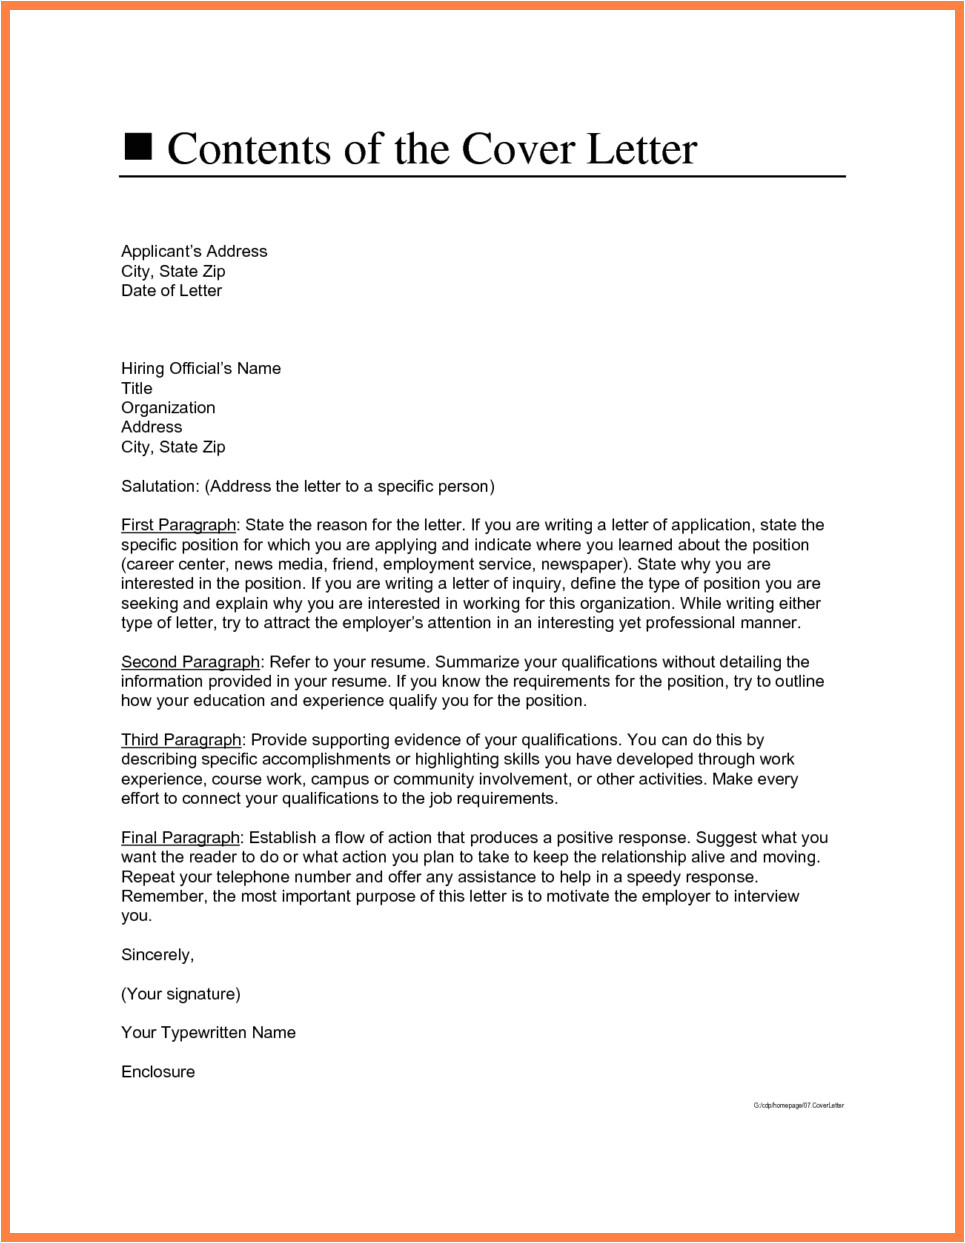 Who Do You Direct A Cover Letter to 5 Cover Letter Address Marital Settlements Information